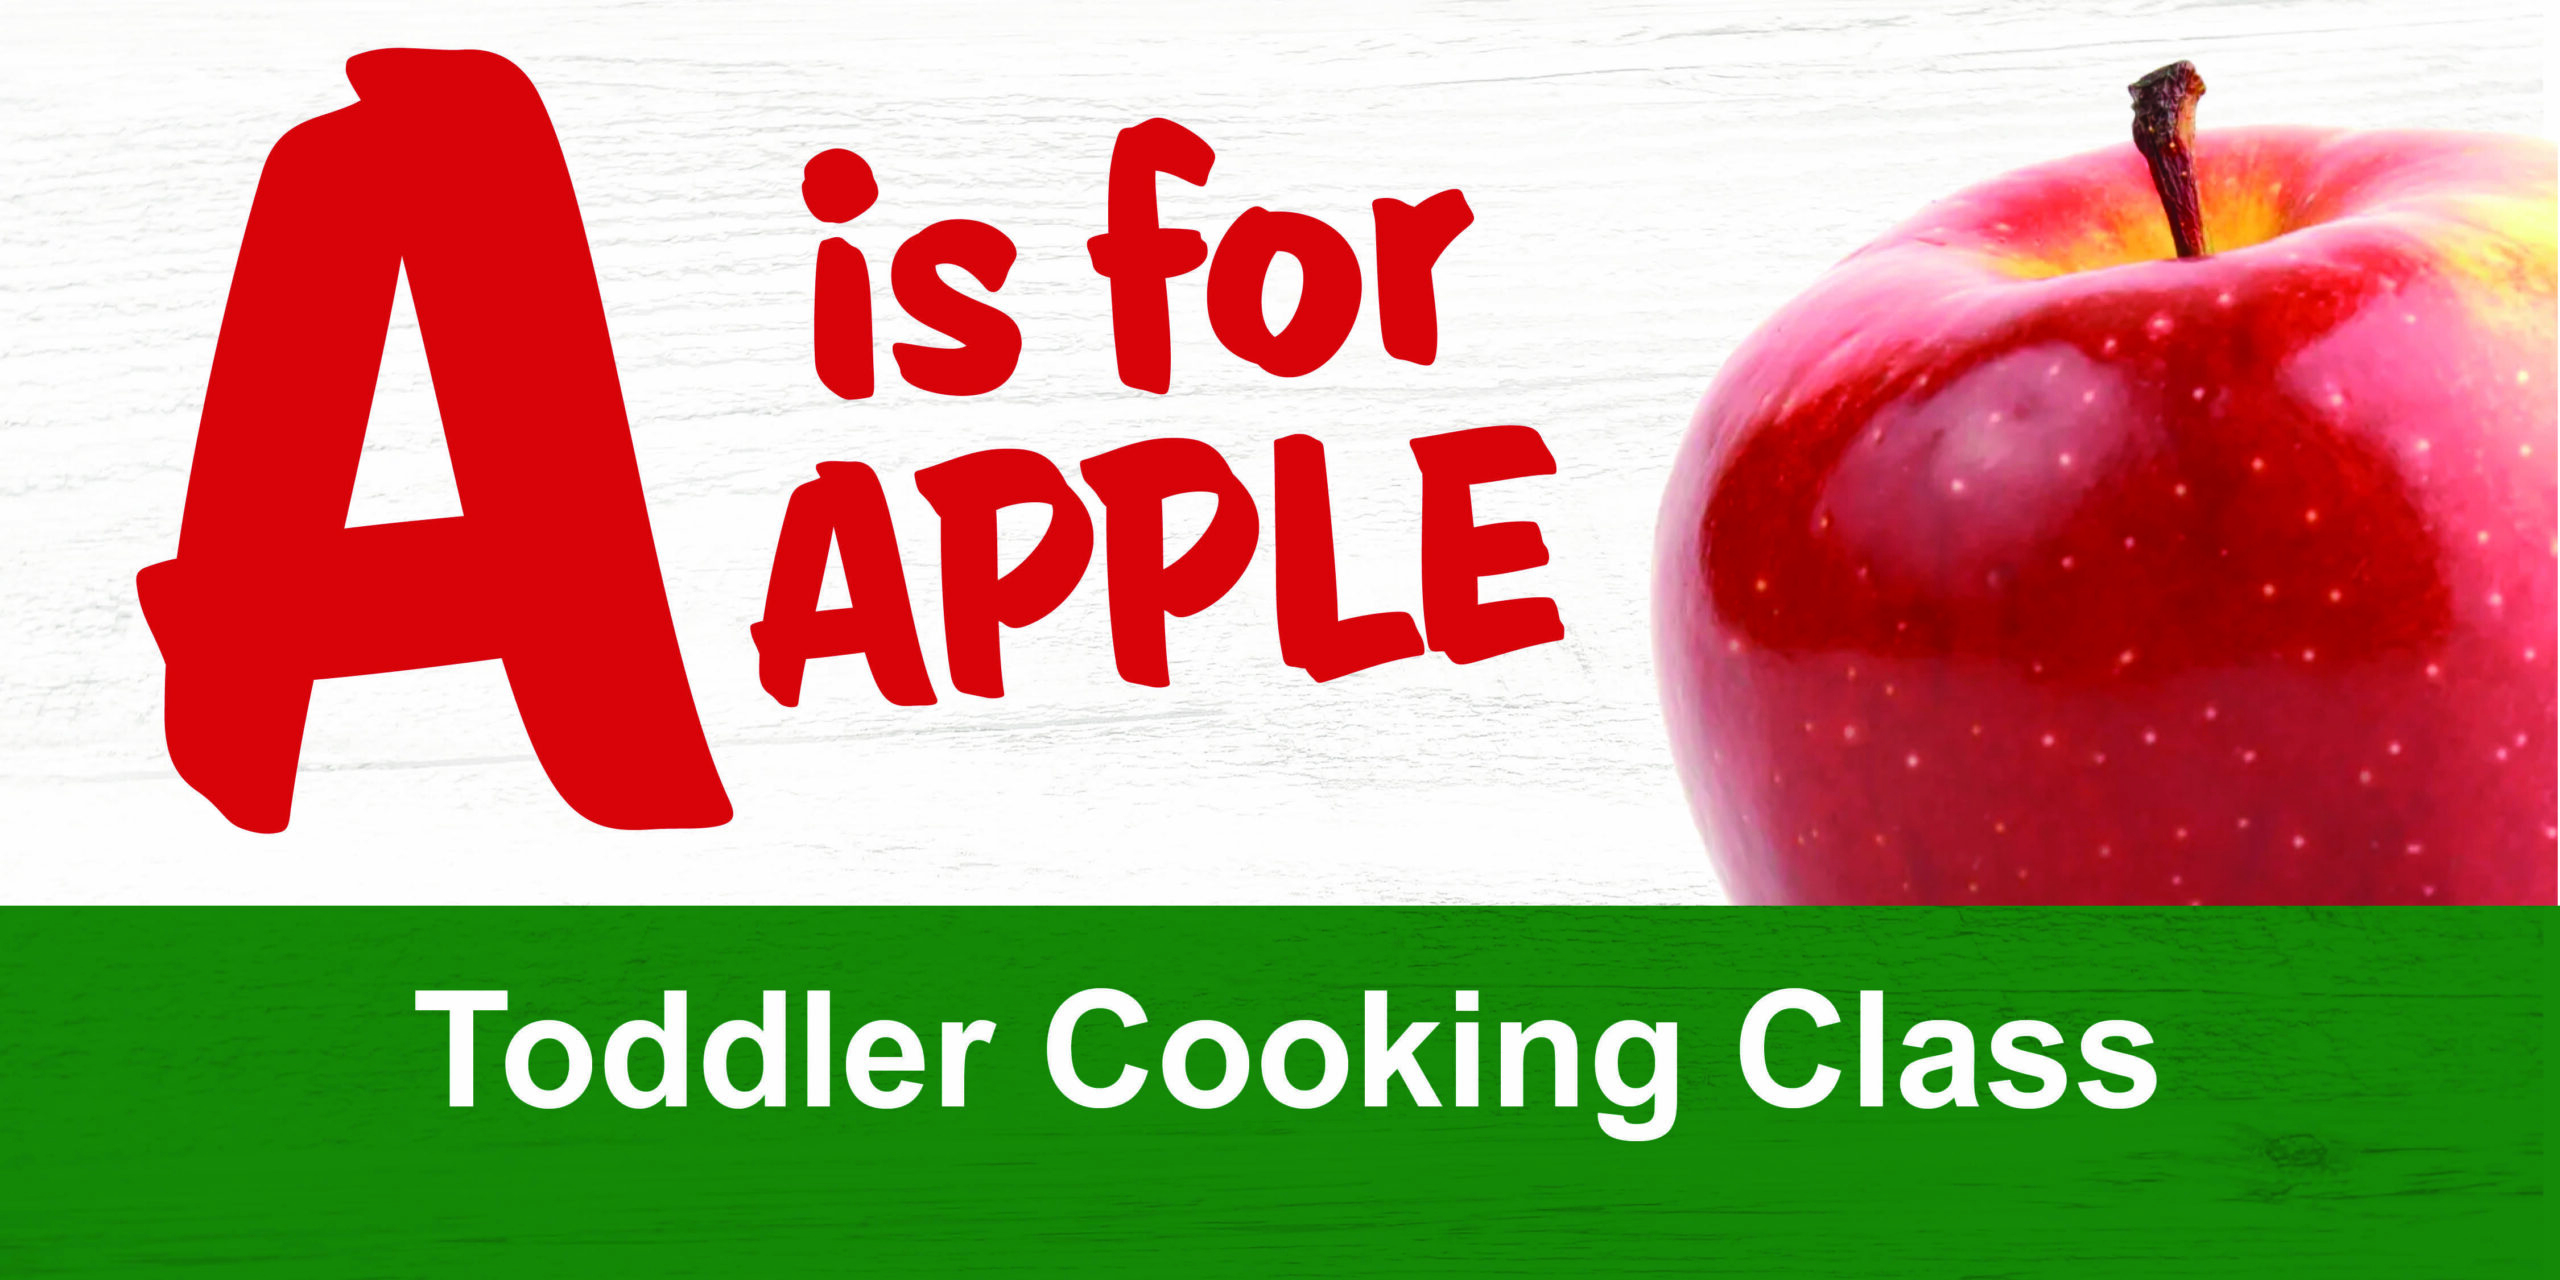 “A” is for Apple Culinary Class for Toddlers